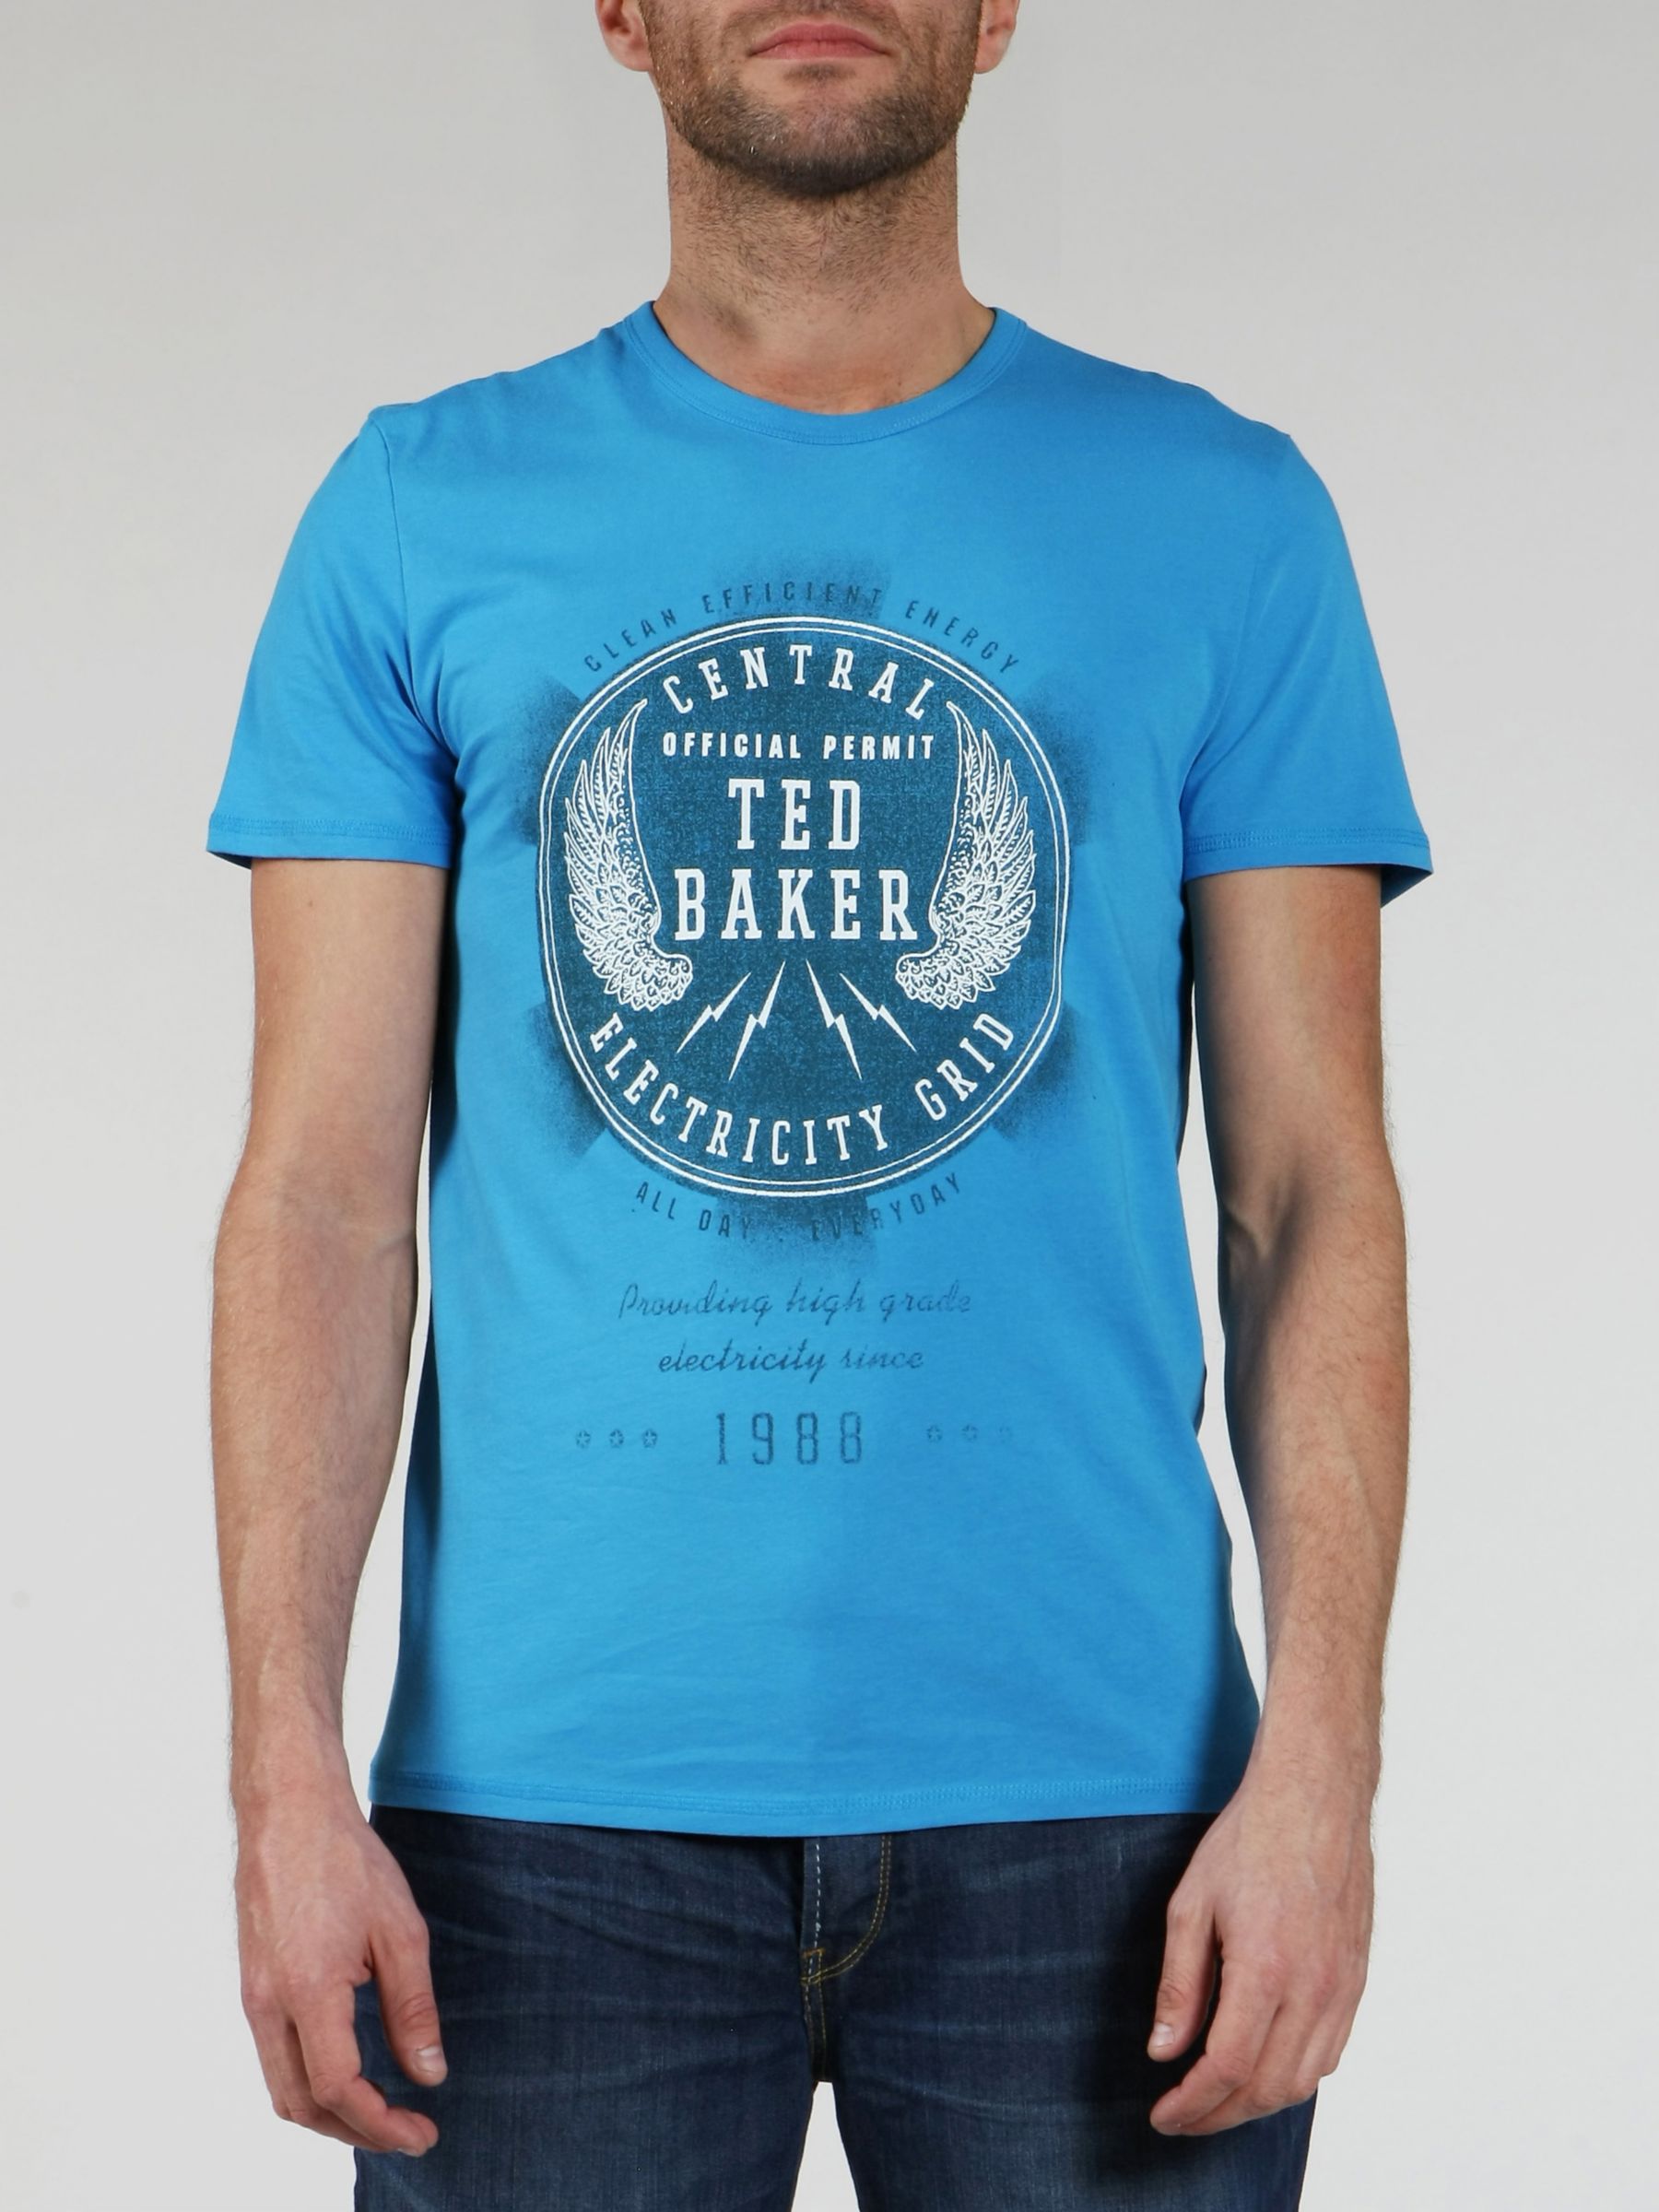 Ted Baker Electric Circle Short-Sleeve T-Shirt,